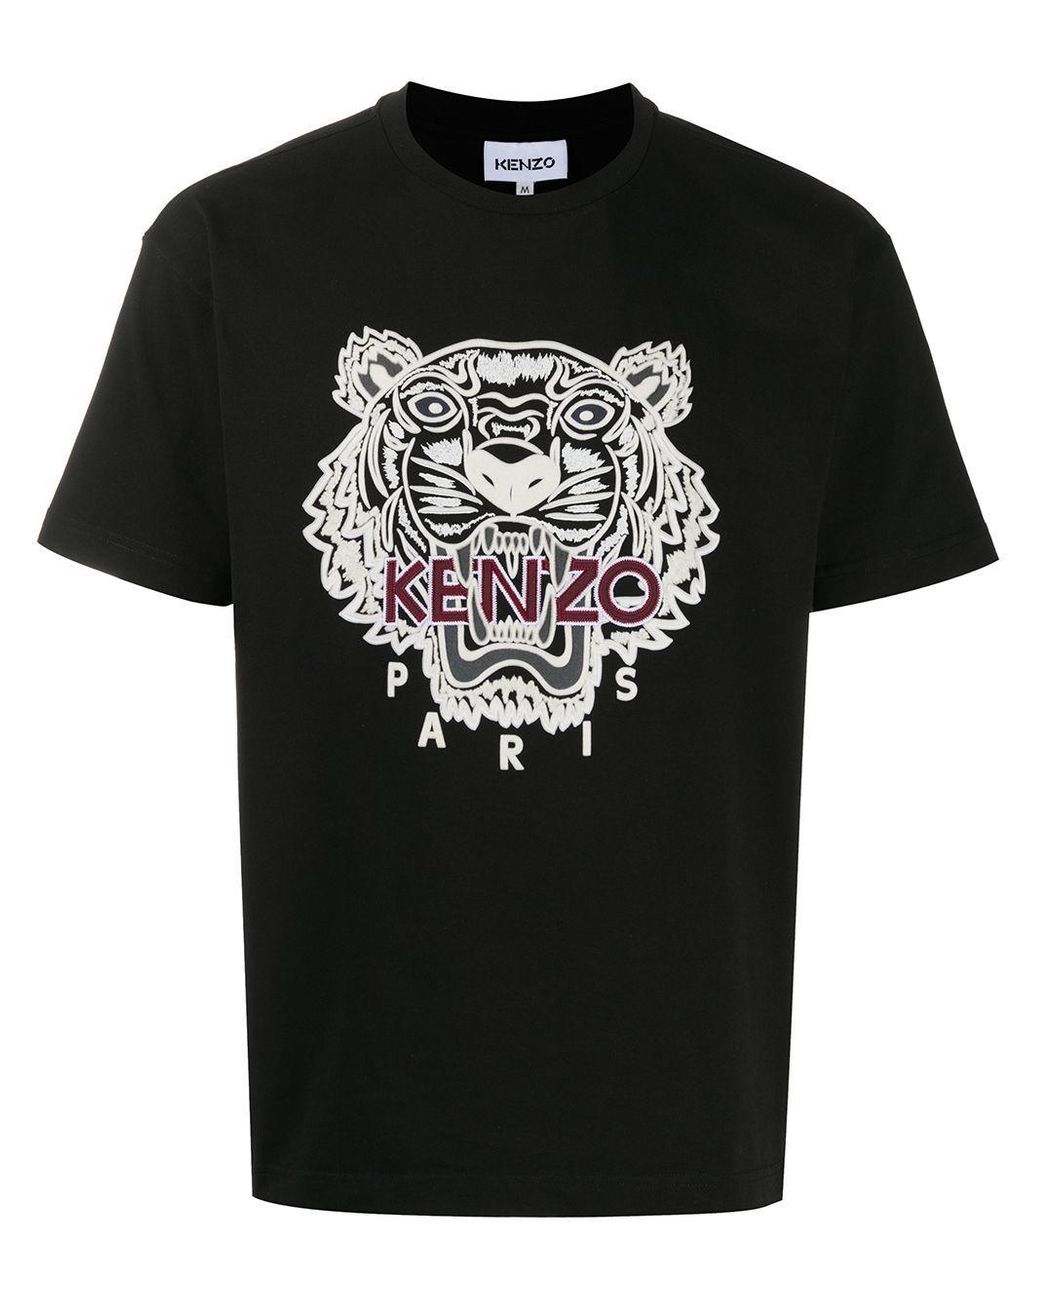 KENZO Embroidered Cotton T-shirt in Black for Men - Lyst